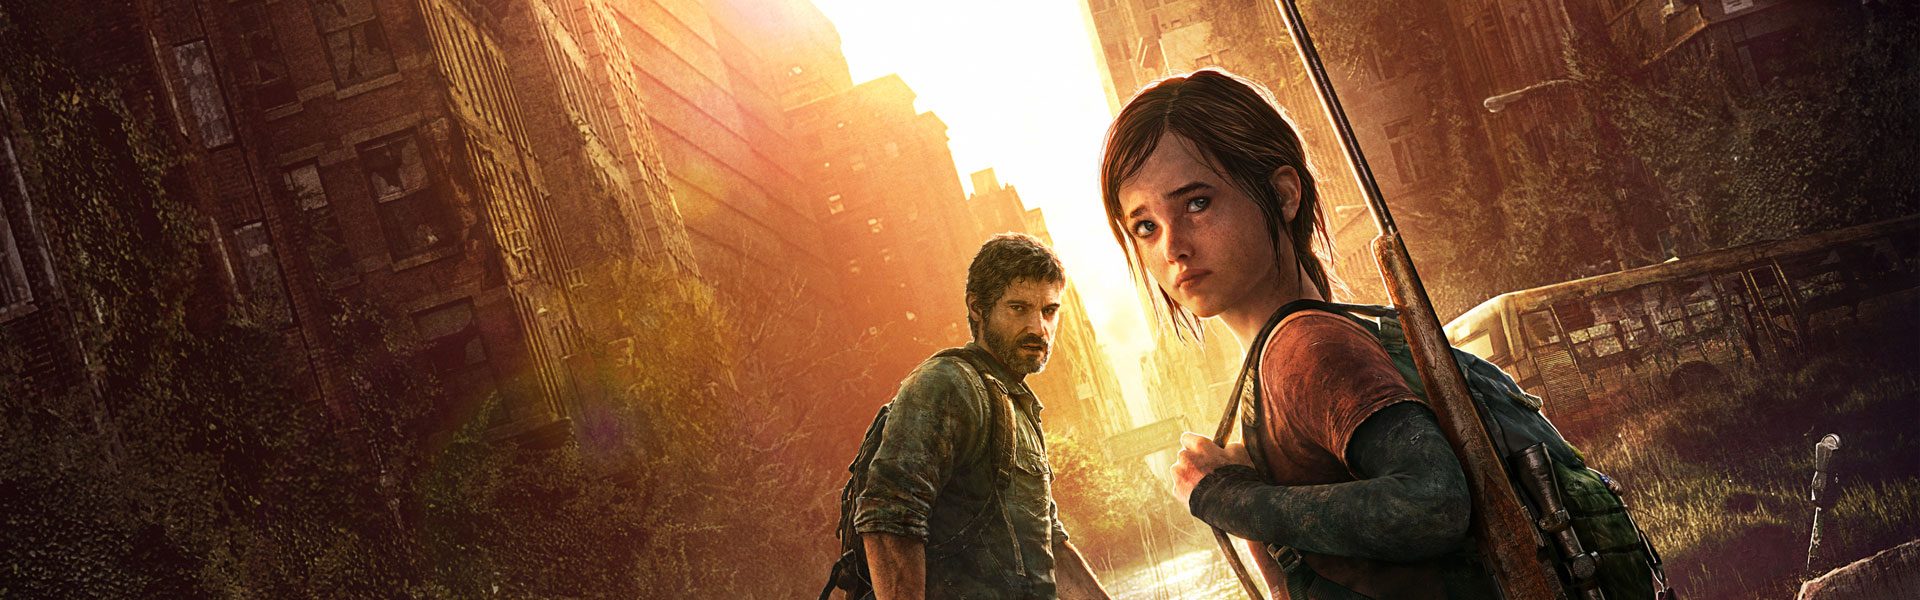 ps4 the last of us 1